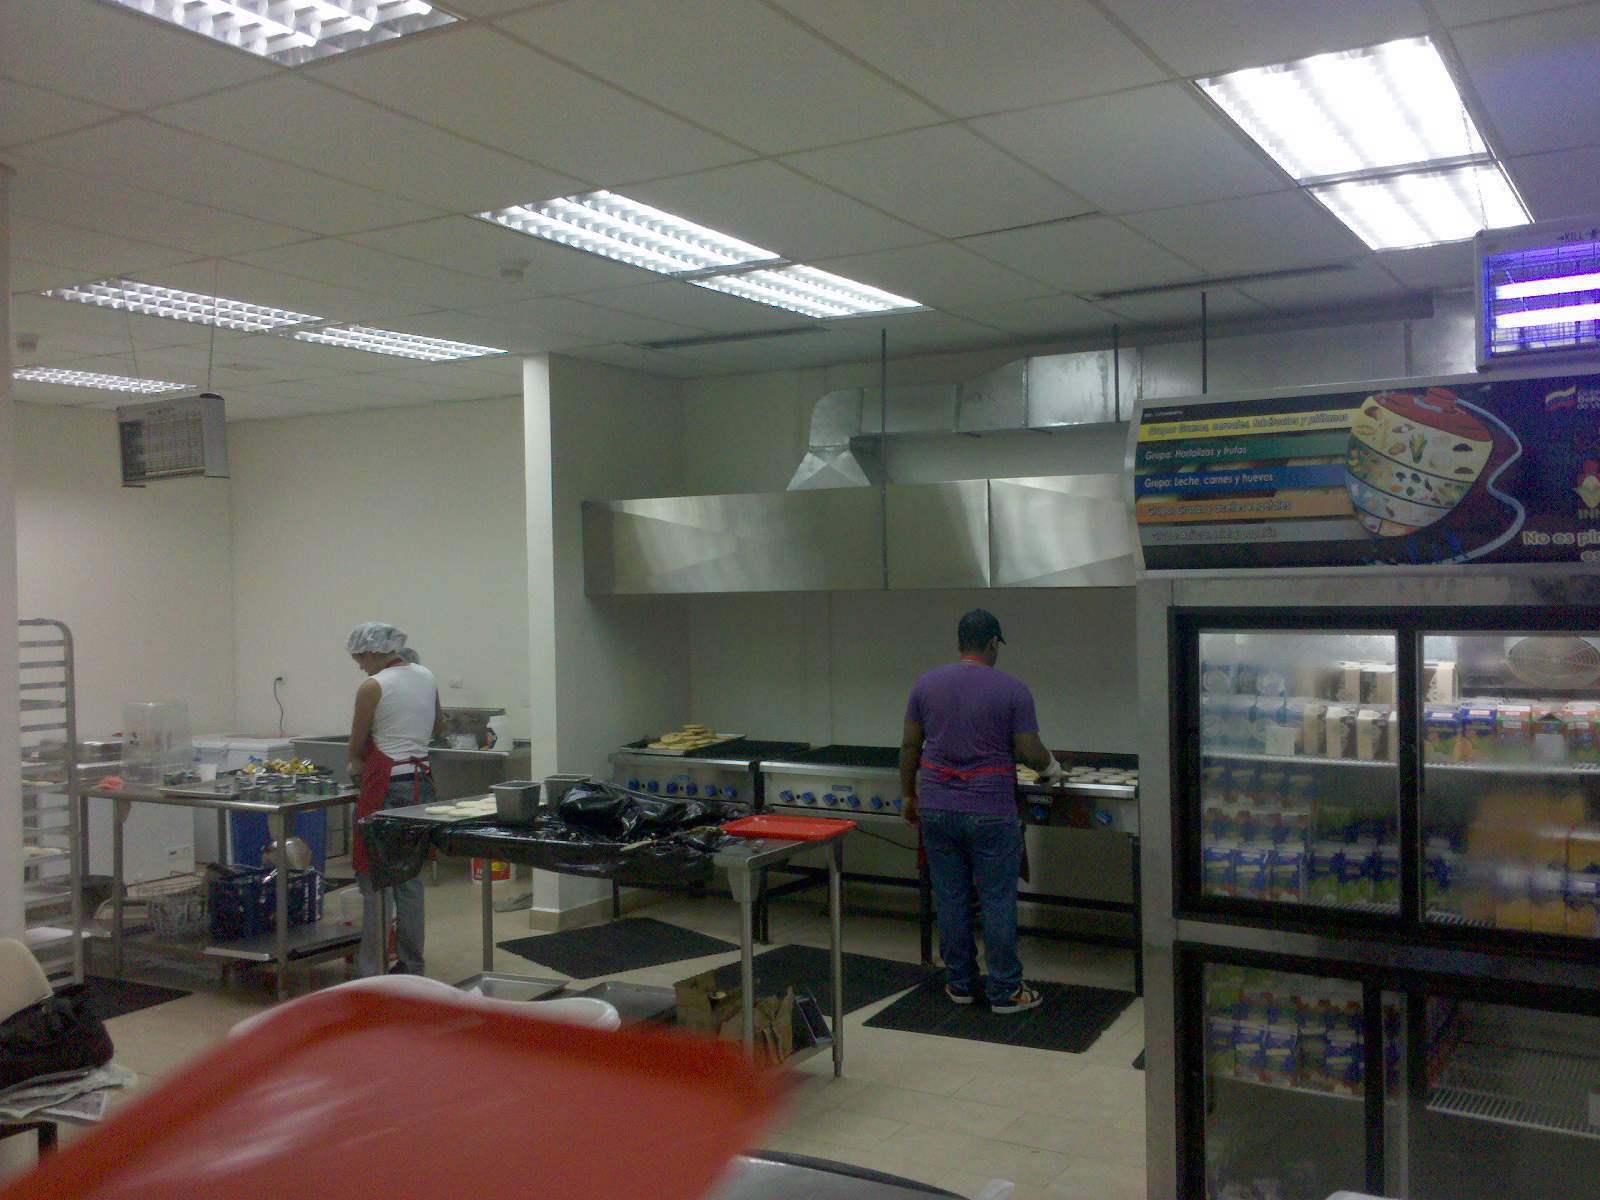 a restaurant has stainless steel appliances and cooking equipment